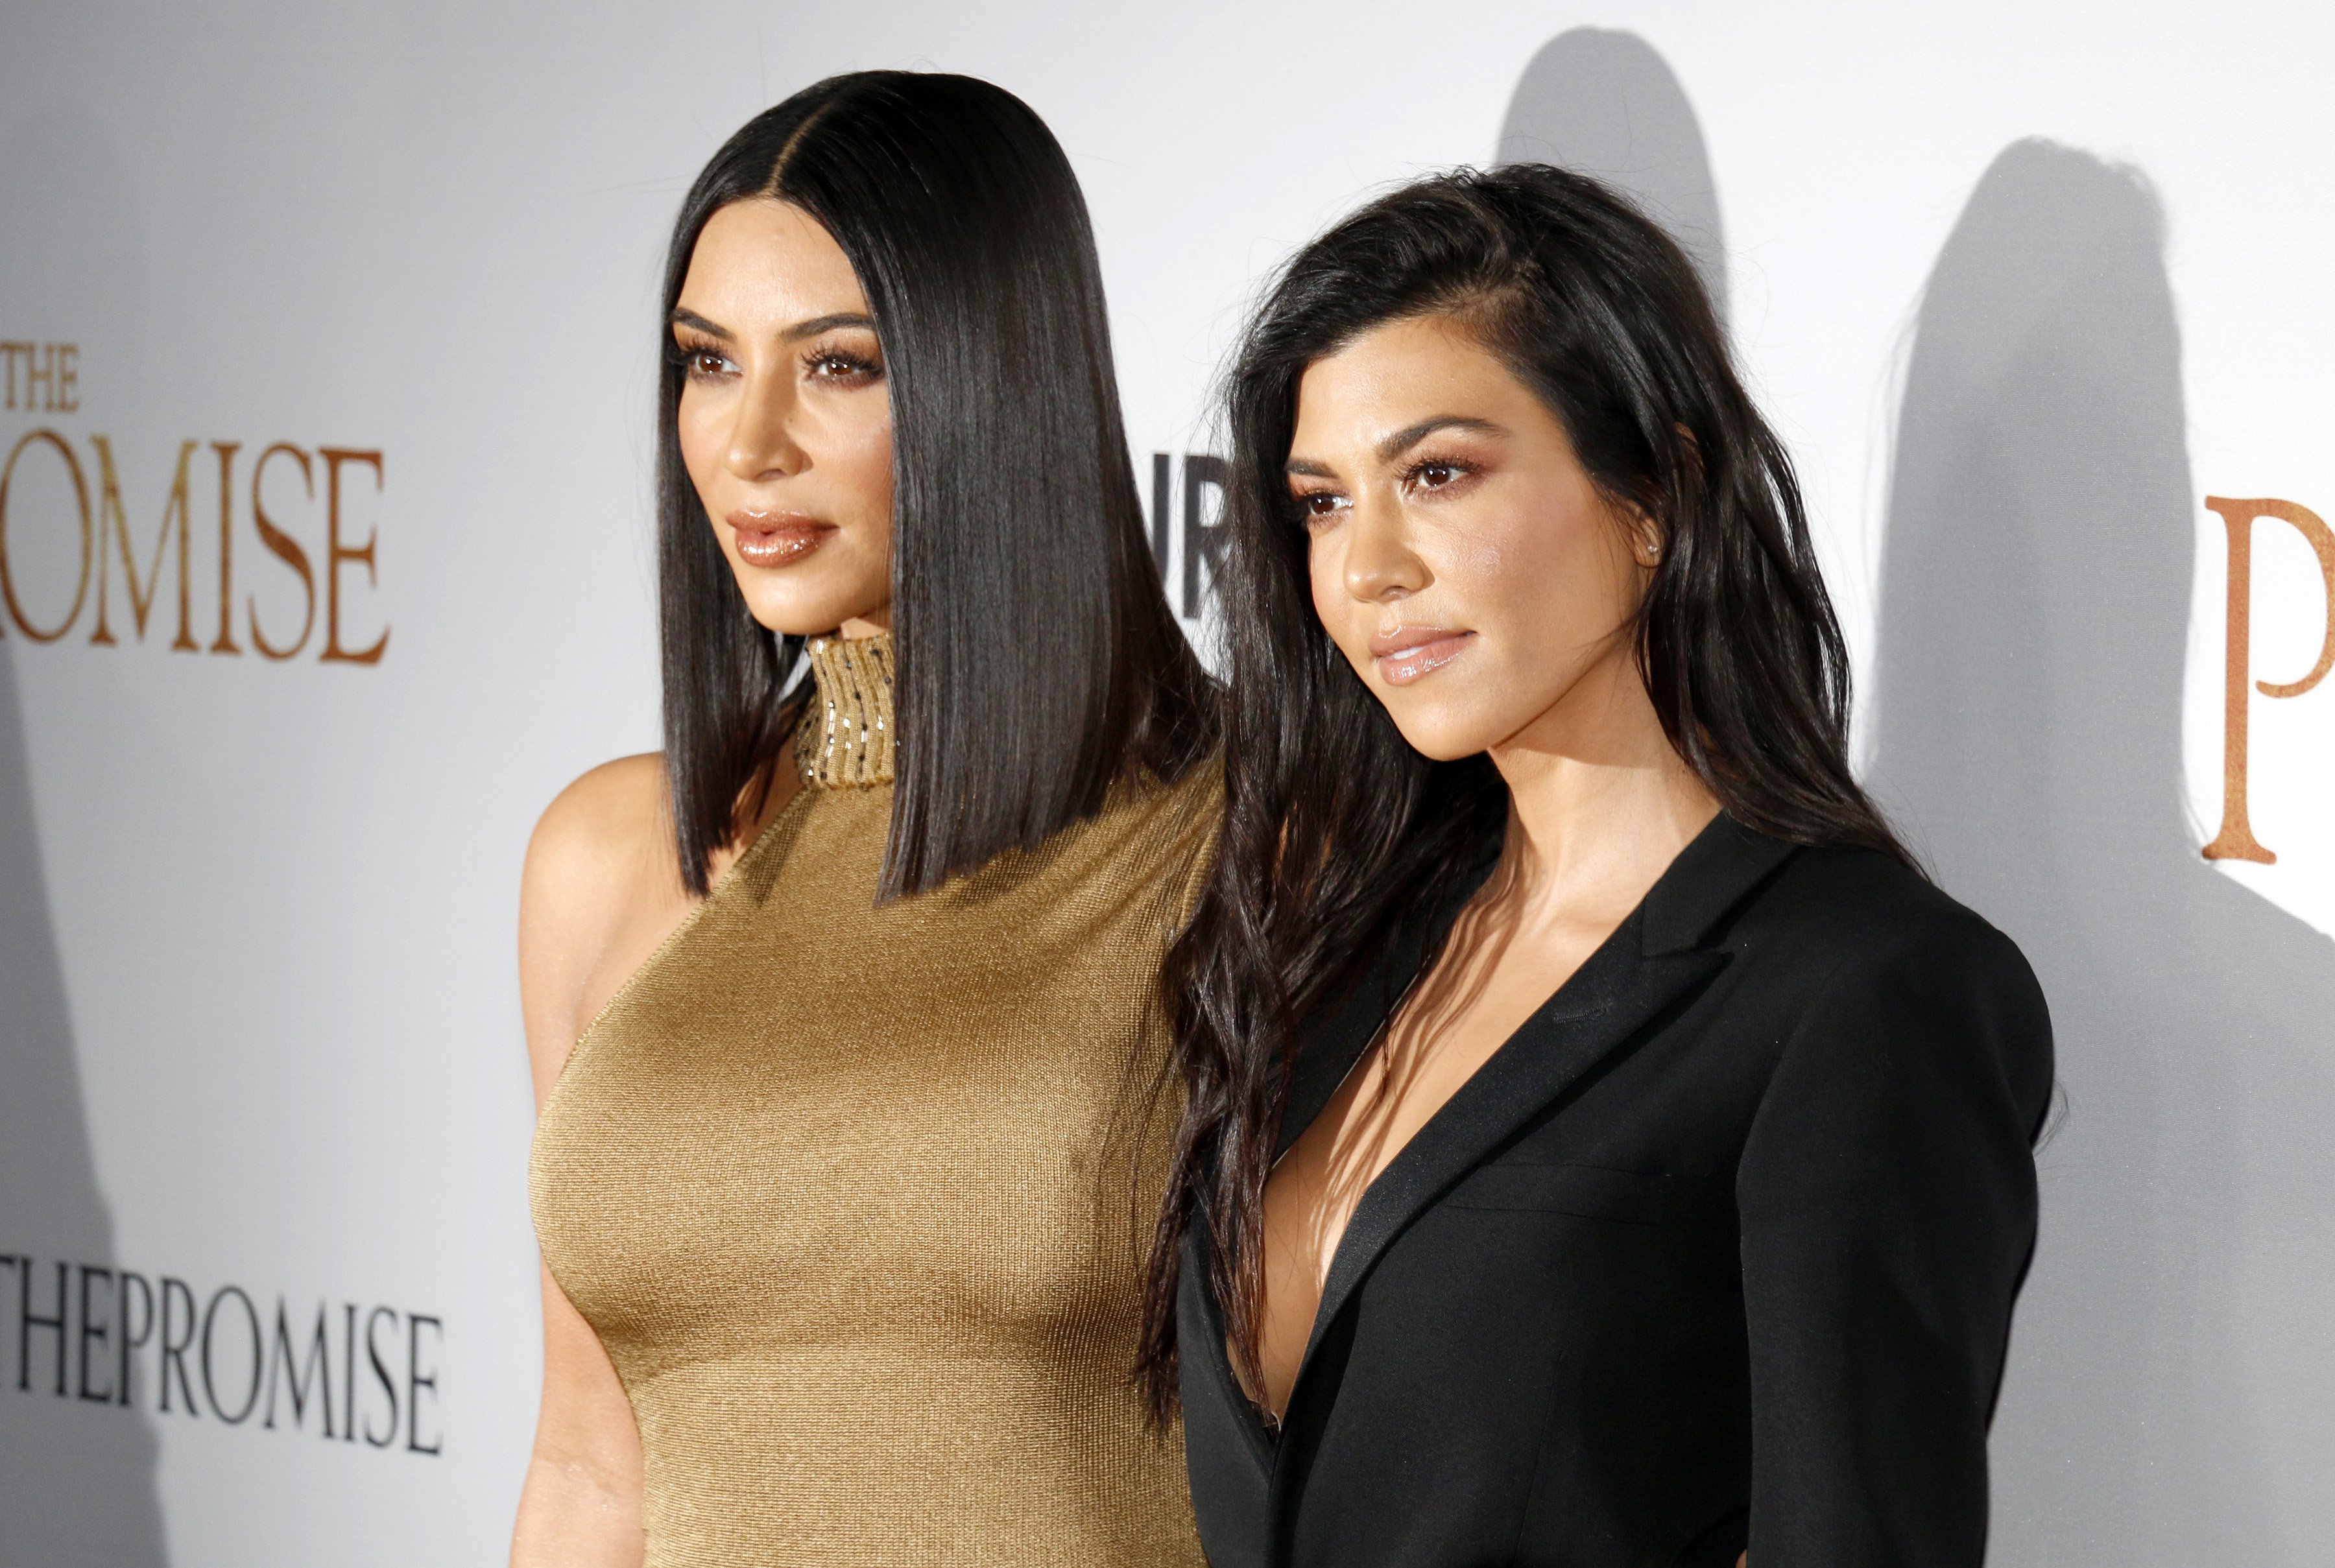 Kim Kardashian West and Kourtney Kardashian at the Los Angeles premiere of 'The Promise' held at the TCL Chinese Theatre in Hollywood, USA on April 12, 2017 | Photo: Shutterstock